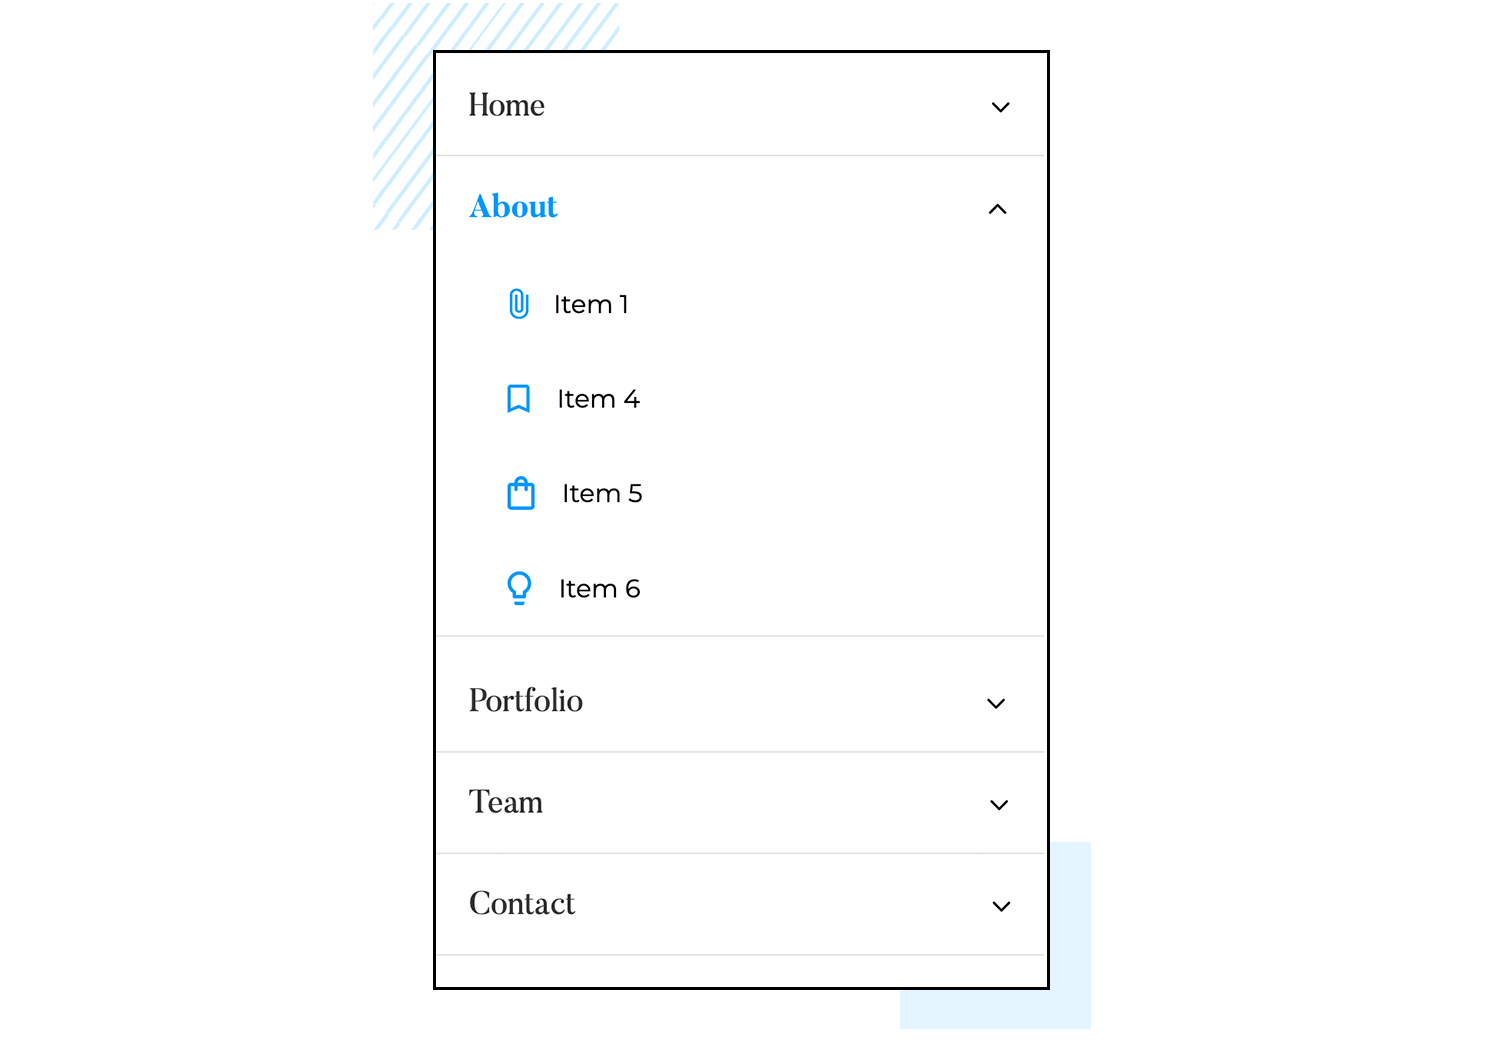 Dropdown menu with navigation links for Home, About, Portfolio, Team, and Contact.